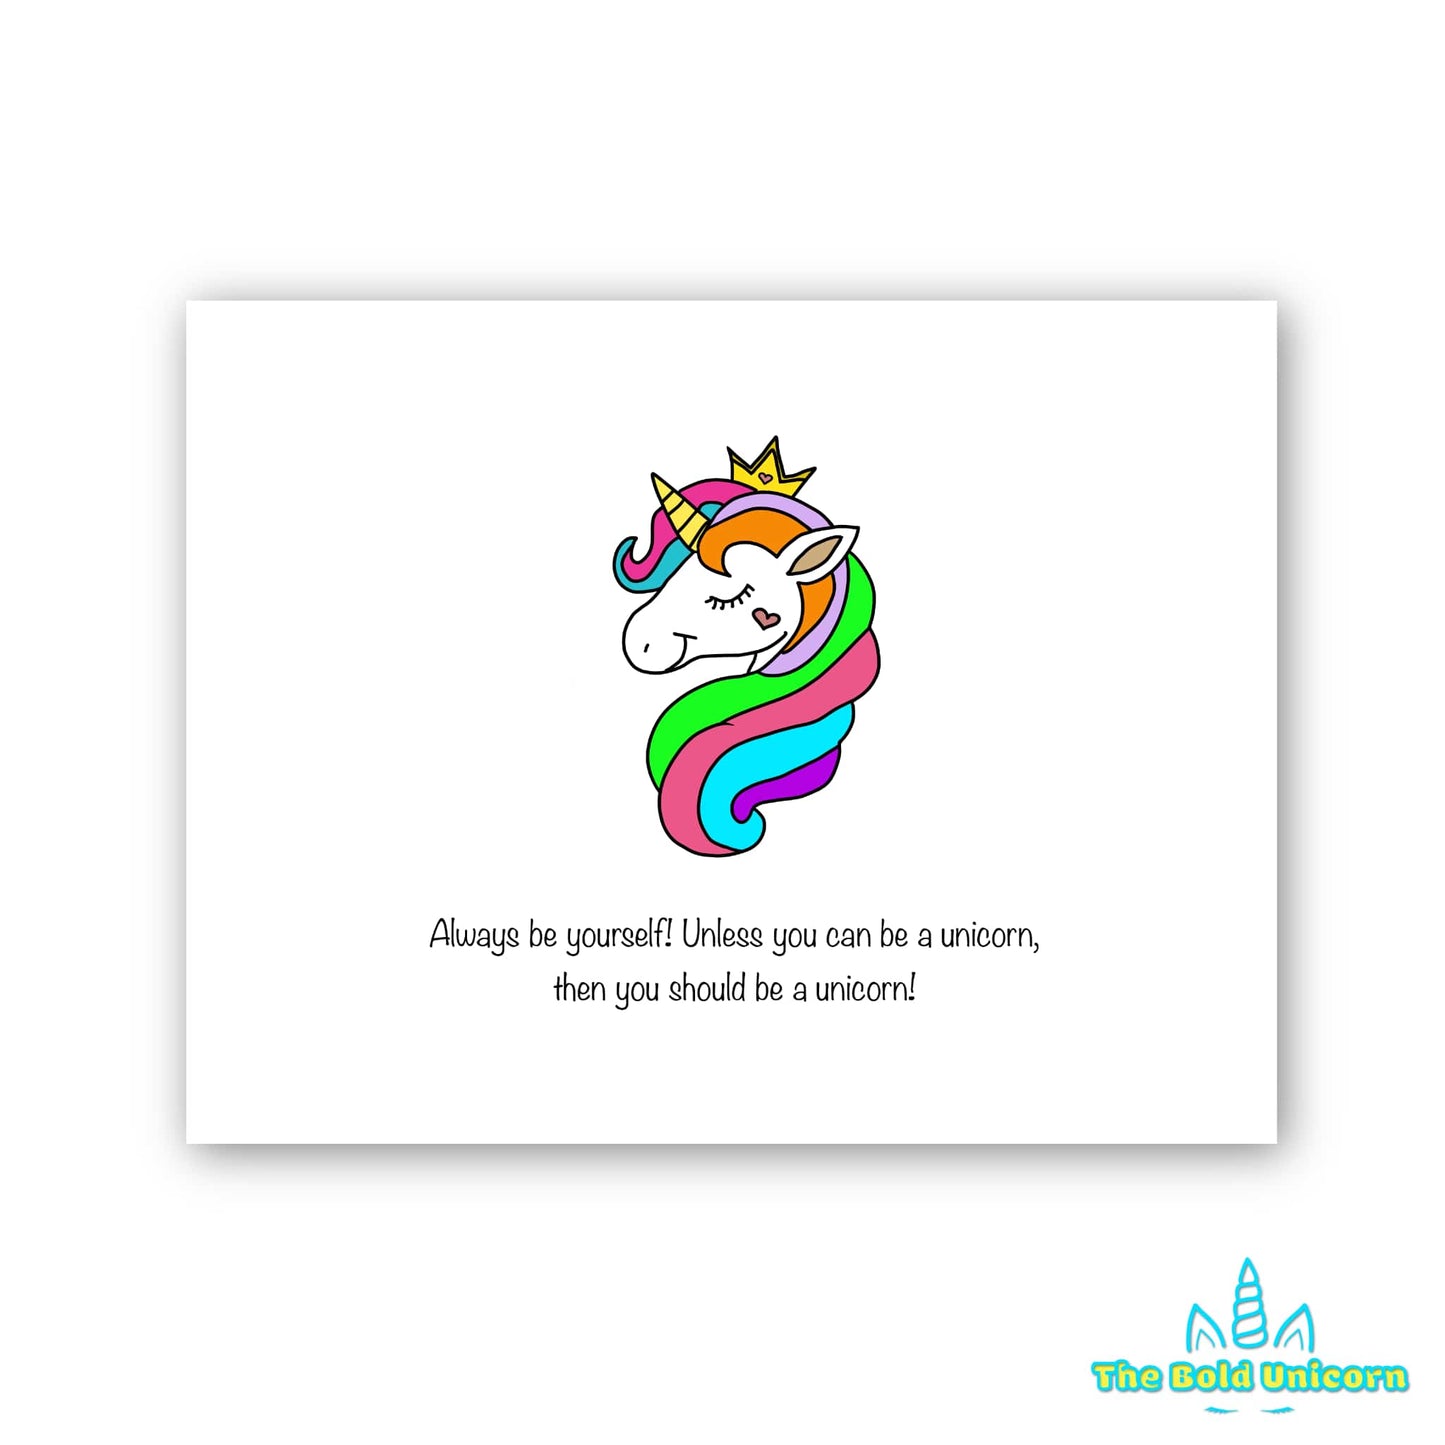 Always be Yourself! Unless you Can be a Unicorn, Then you Should be a Unicorn